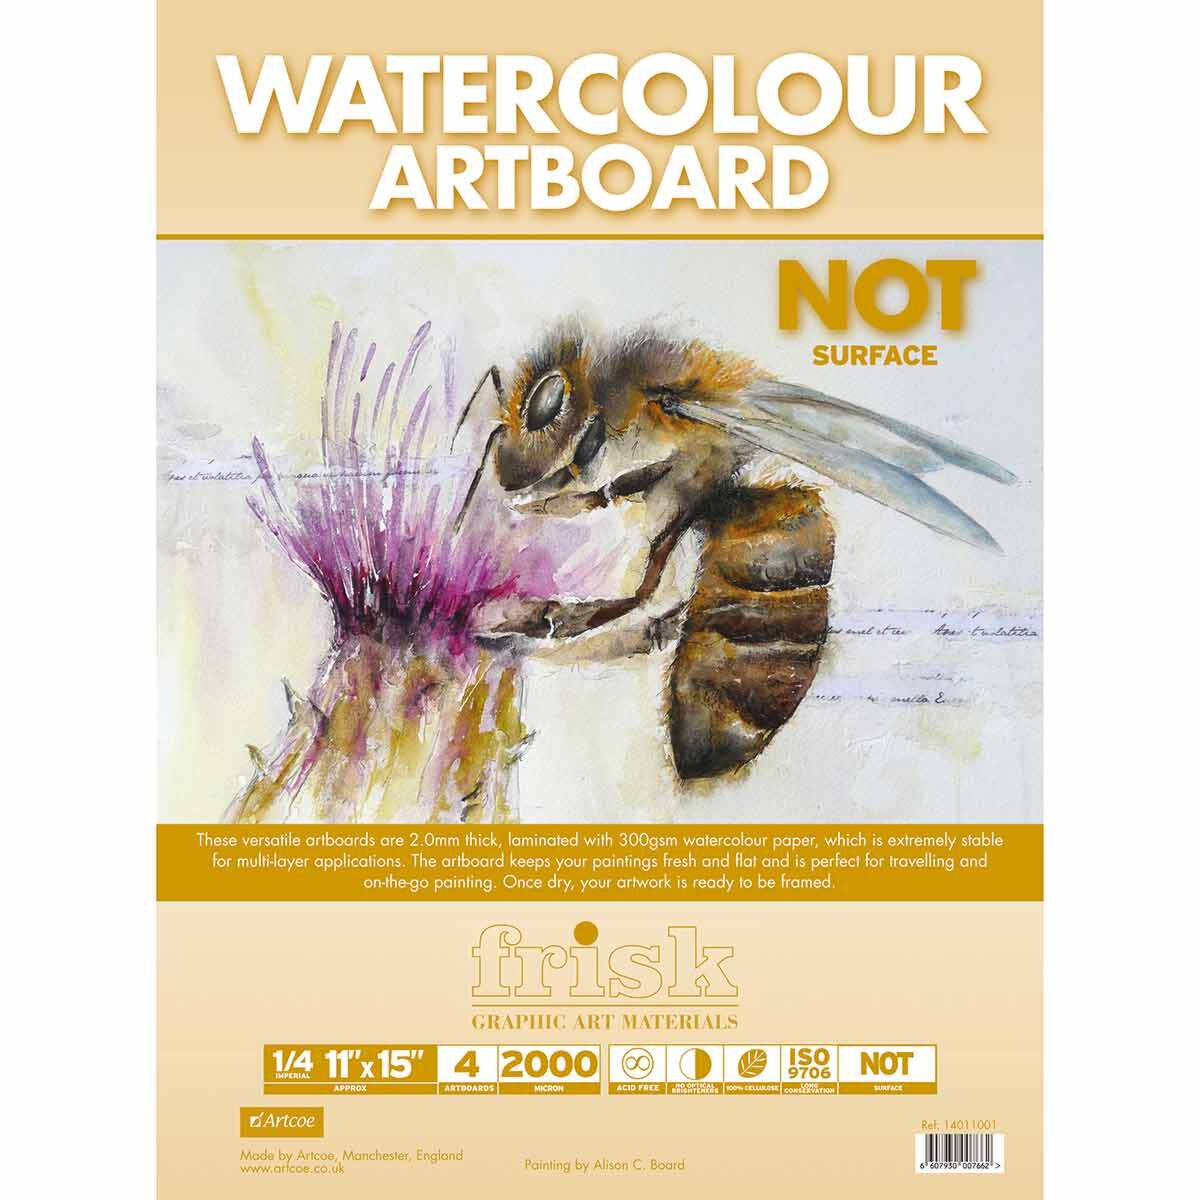 Frisk Watercolour Artboard 1/4 imperial 11 x 15" pack of 4